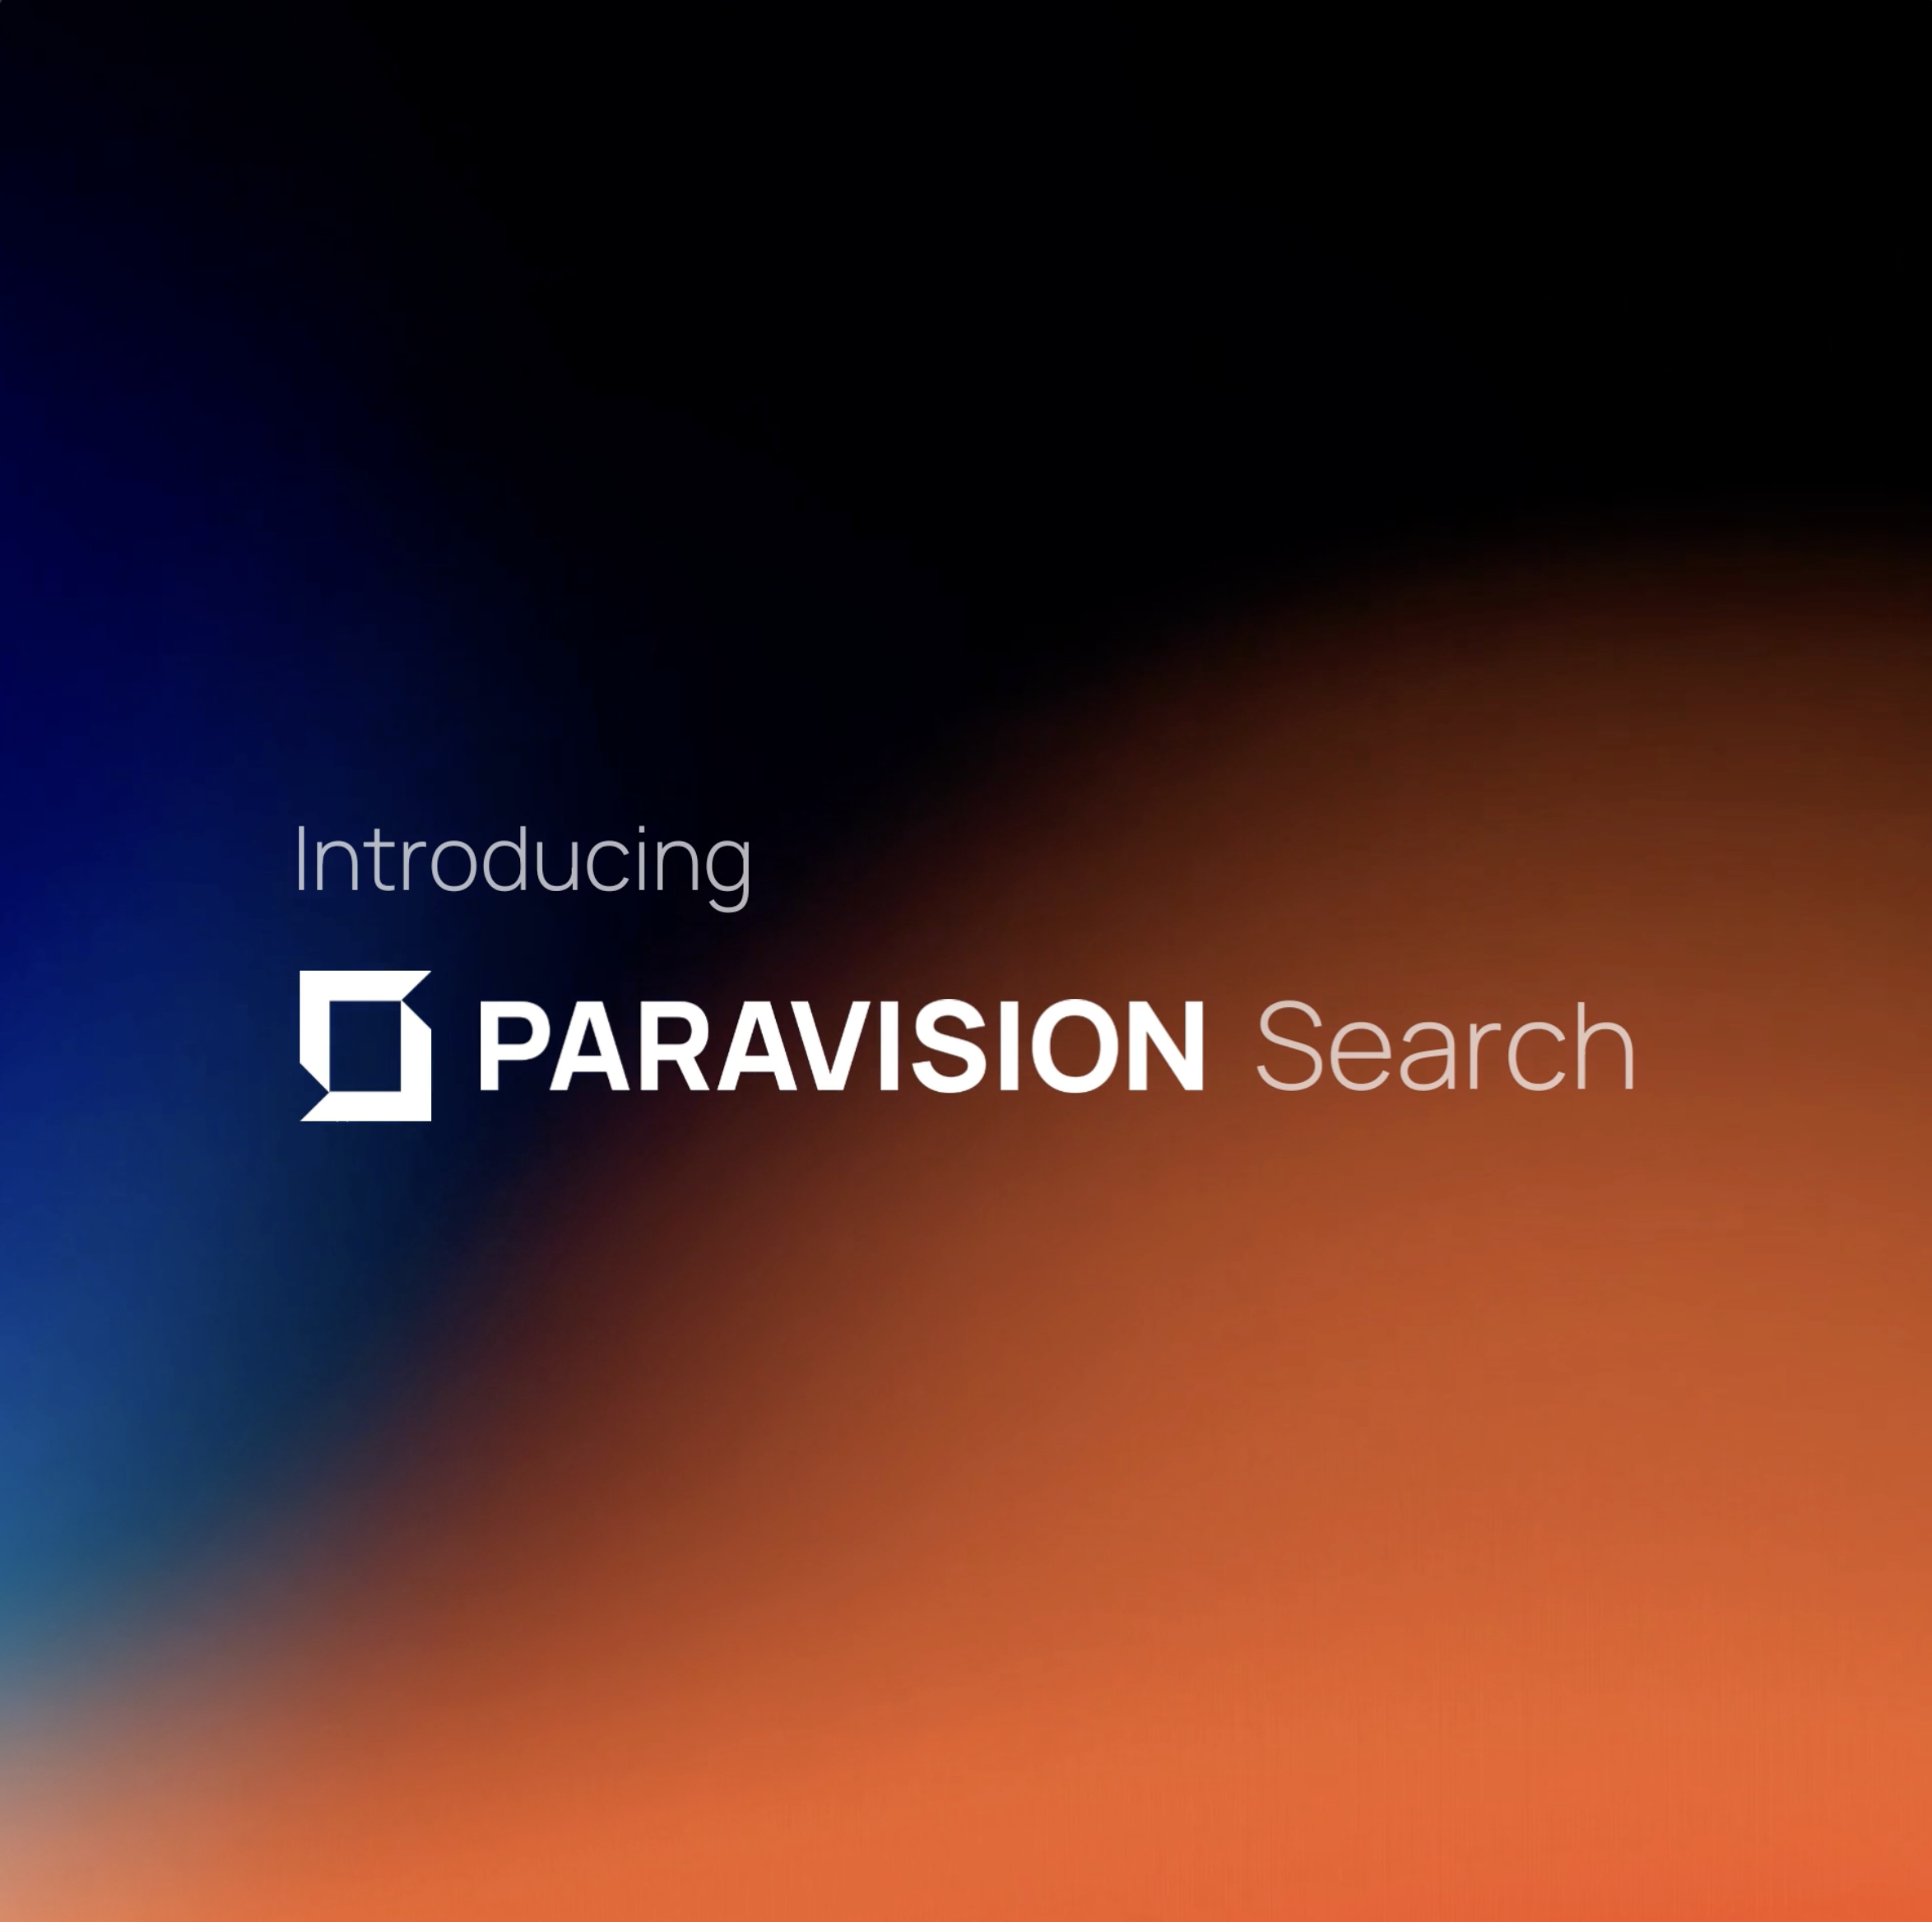 Introducing Paravision Search